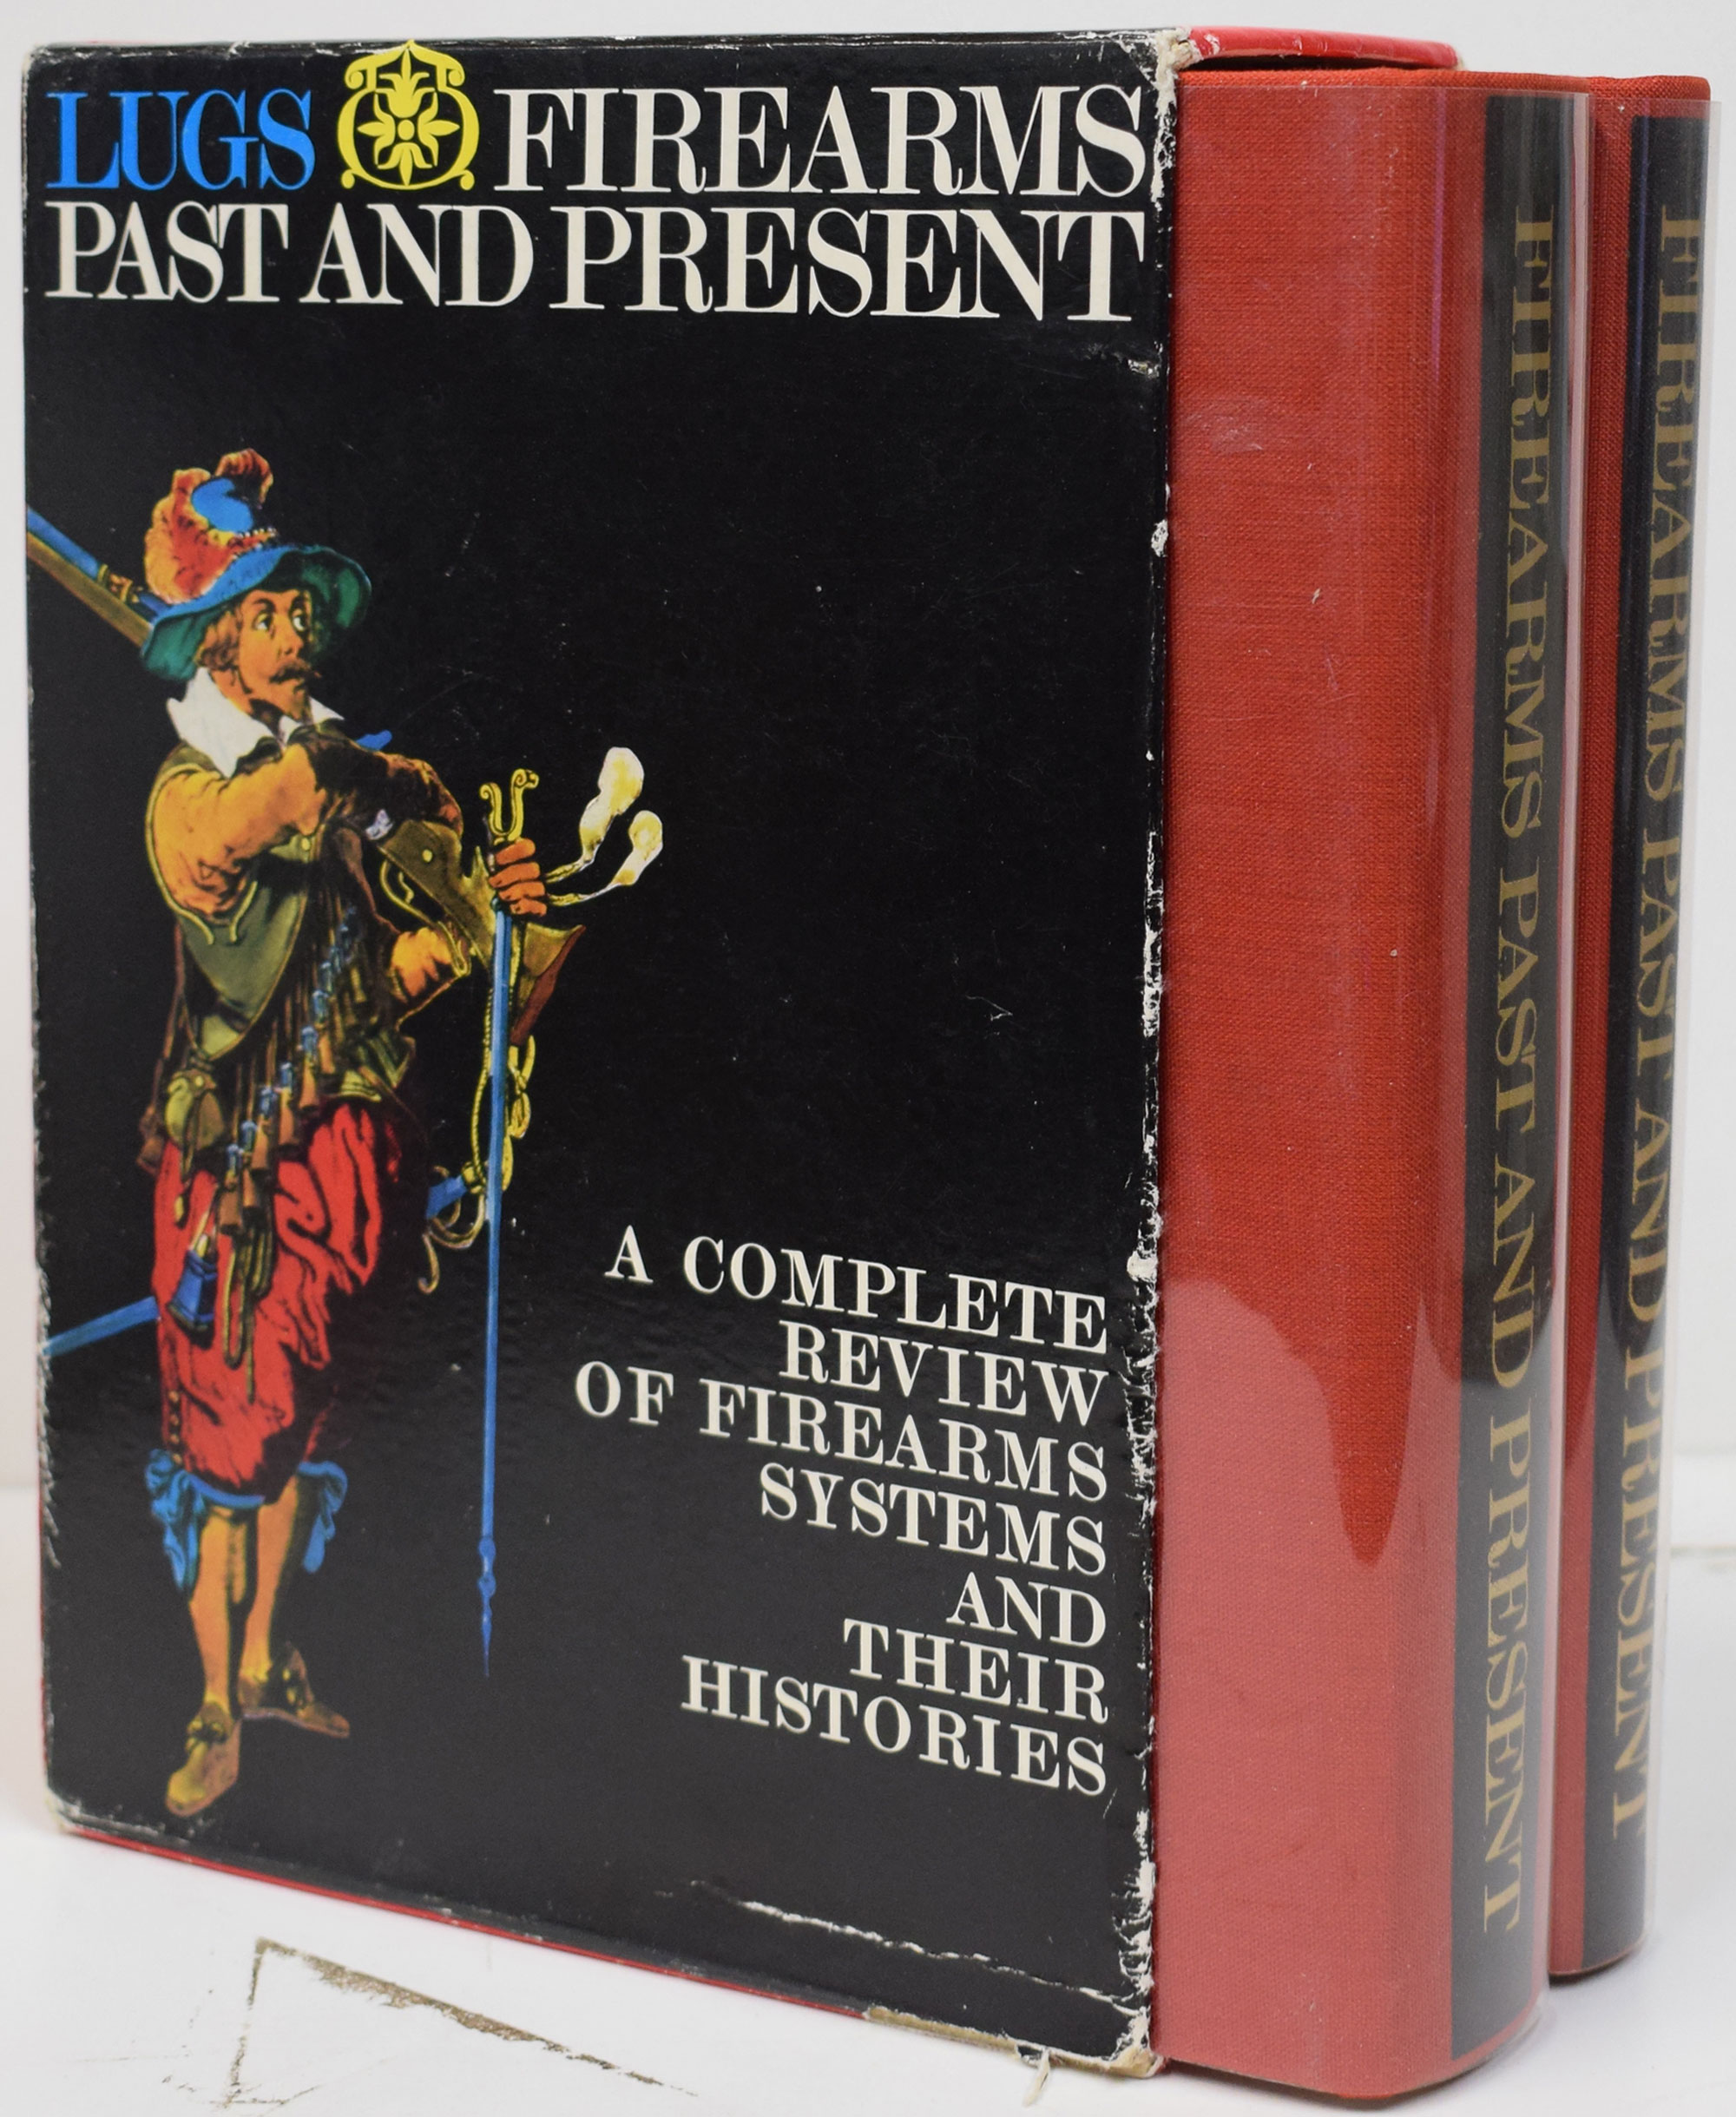 Firearms Past and Present. A Complete Review of Firearm Systems and their Histories. 2 volume set in slipcase.